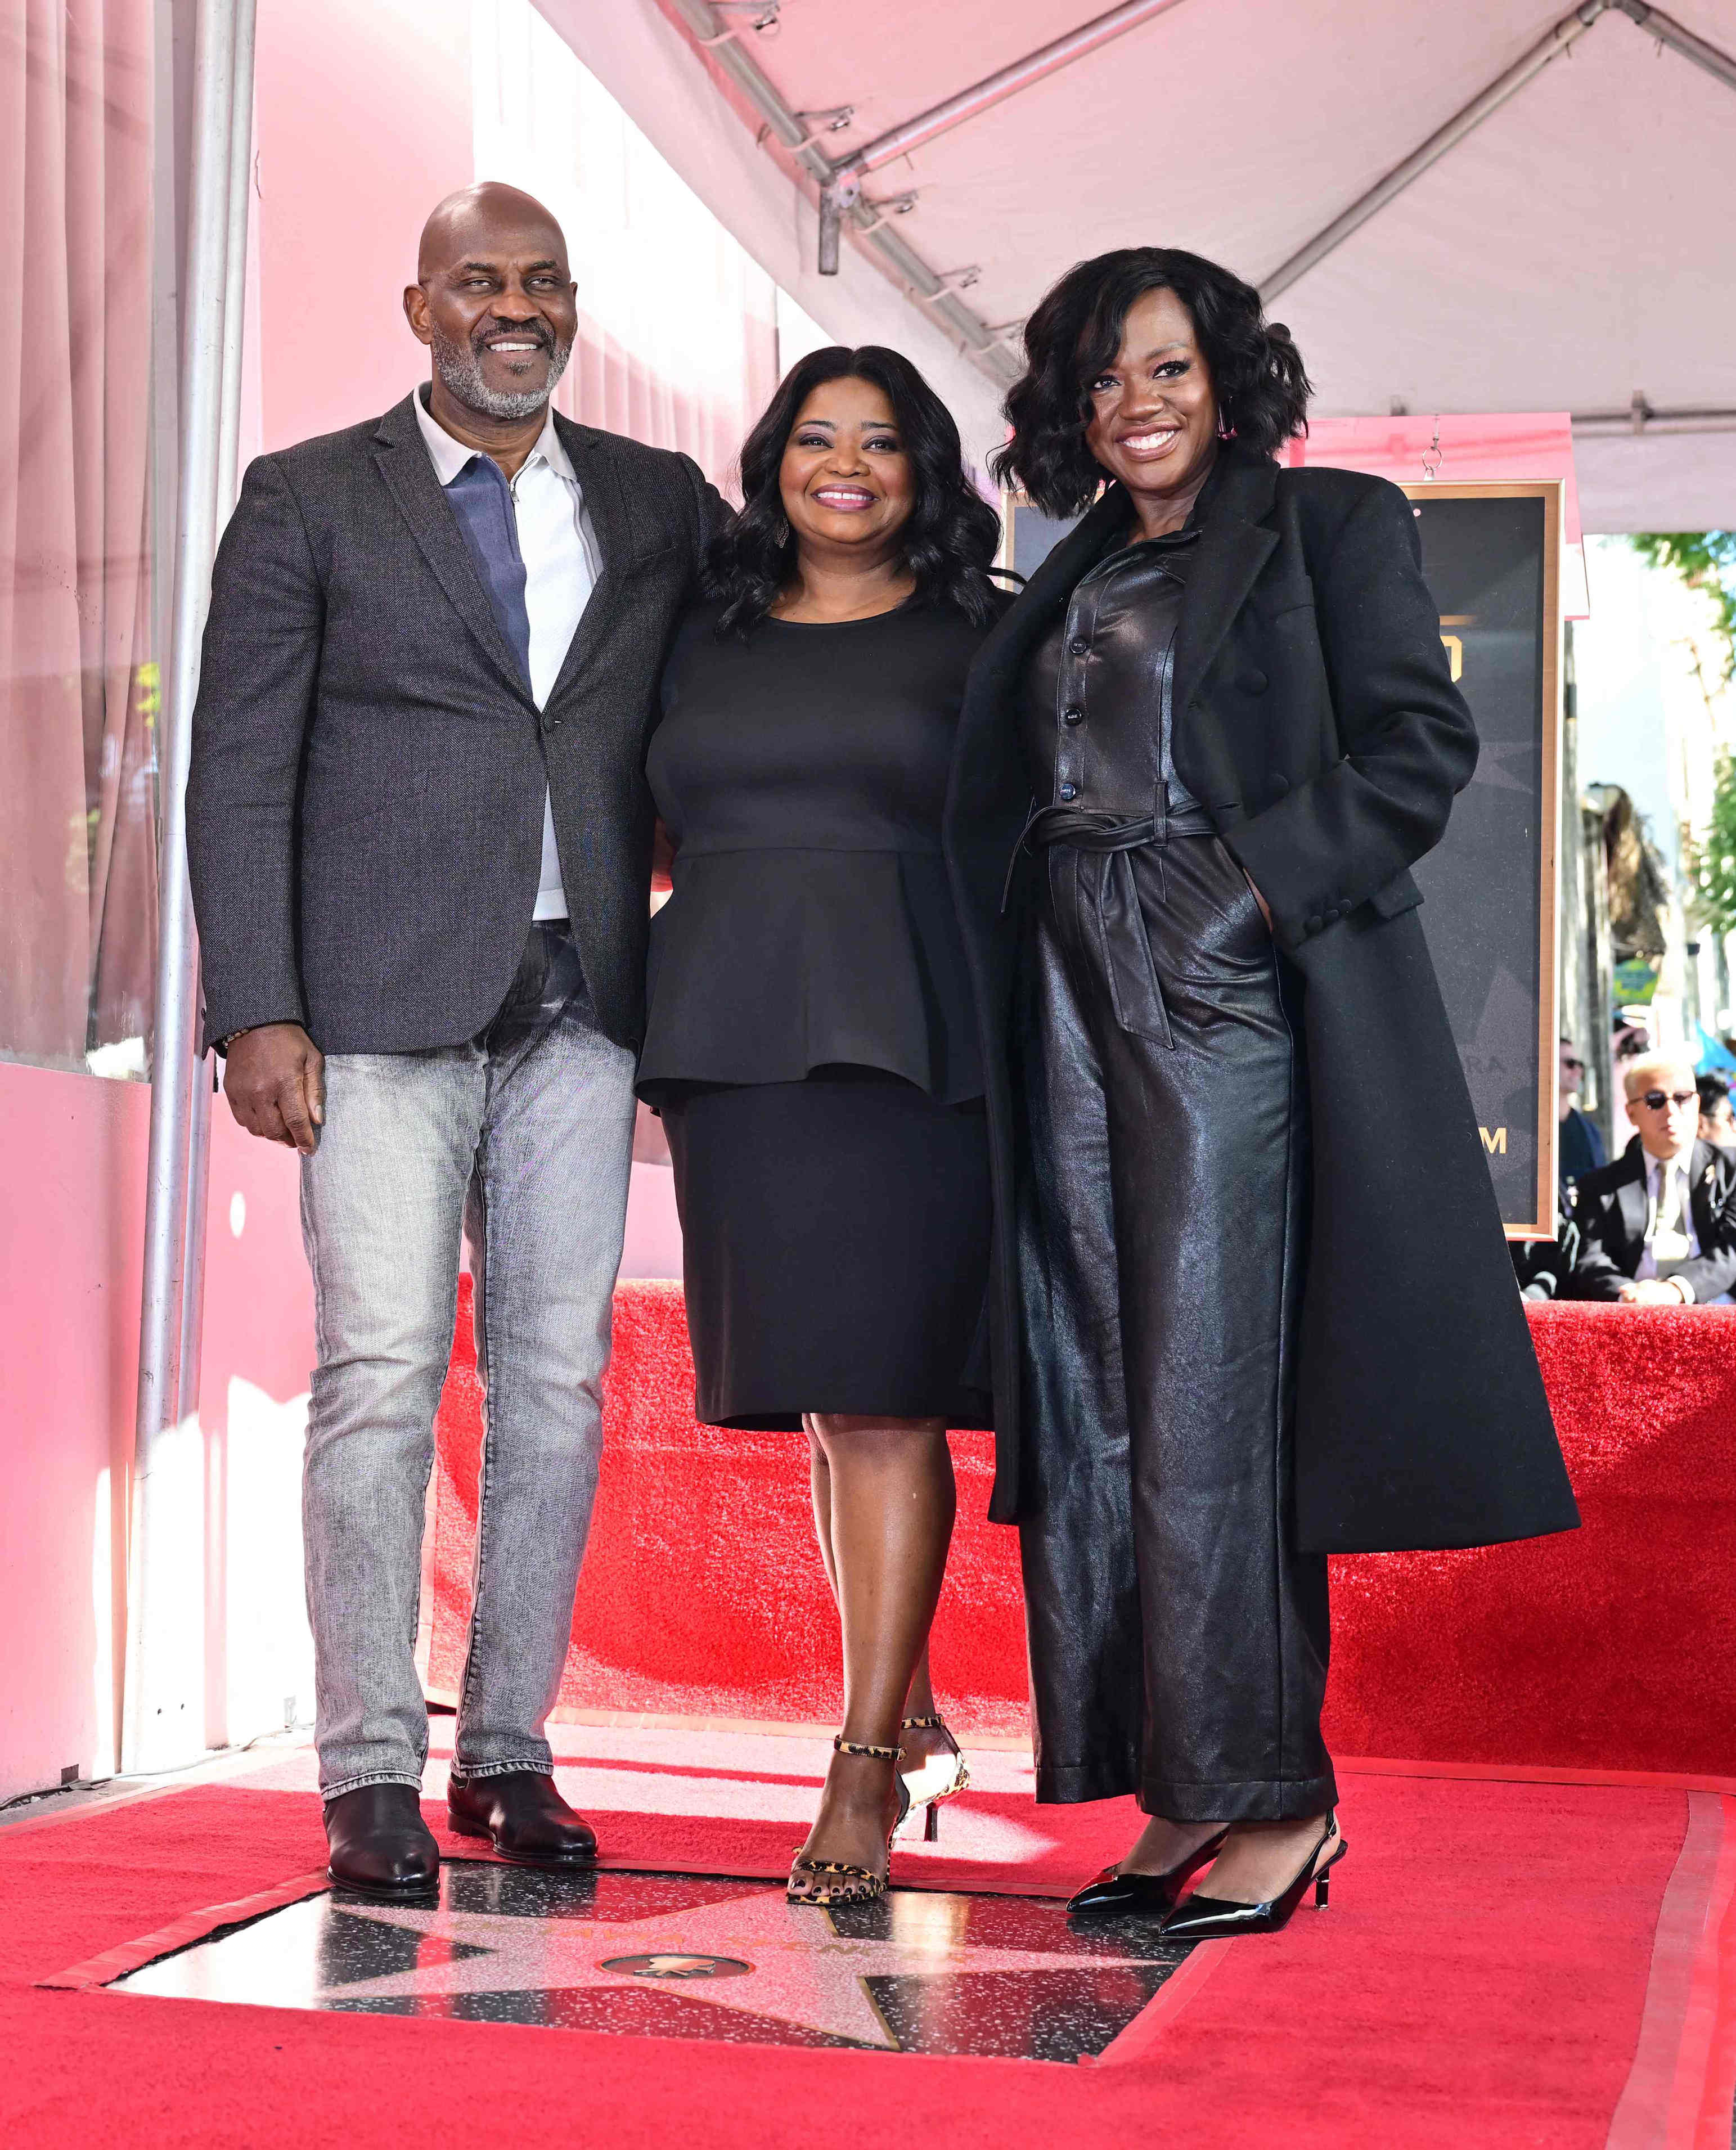 Viola Davis and her actor husband Julius Tennon also joined Spencer for the esteemed honor. "What a day! Grateful does not begin to describe how I feel about this honor.  Receiving my star on the <a href="https://www.instagram.com/hwdwalkoffame/">@hwdwalkoffame</a> today will always be one of the most special moments in my life," Spencer<a href="https://www.instagram.com/p/Cl7oaOXLK2I/"> wrote on Instagram </a>after the ceremony.